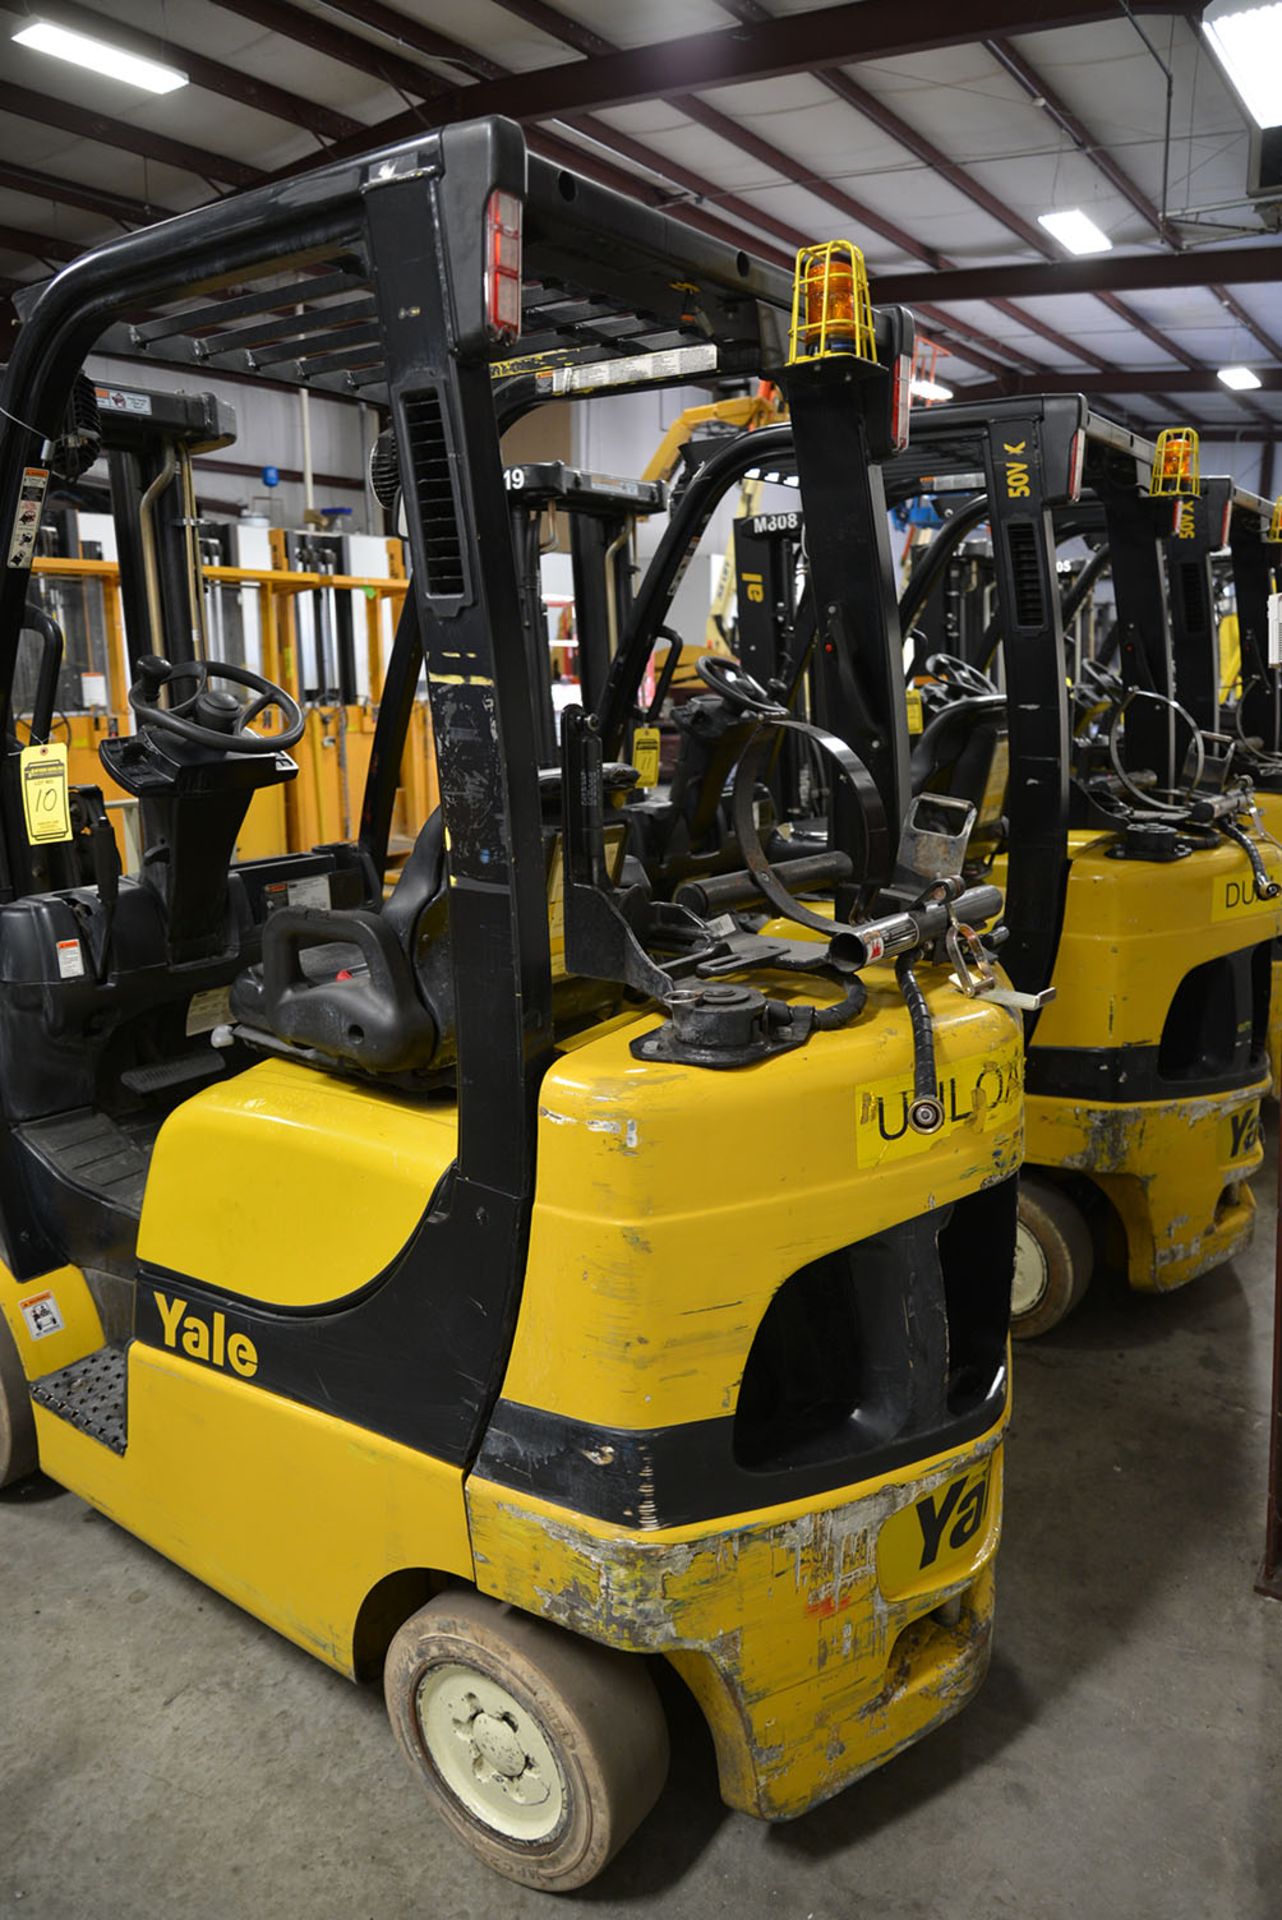 2008 YALE 5,000-lb. Capacity Forklift, Model GLC050VXNV, S/N A910V13935F, LPG, Solid Non-Marking - Image 5 of 7